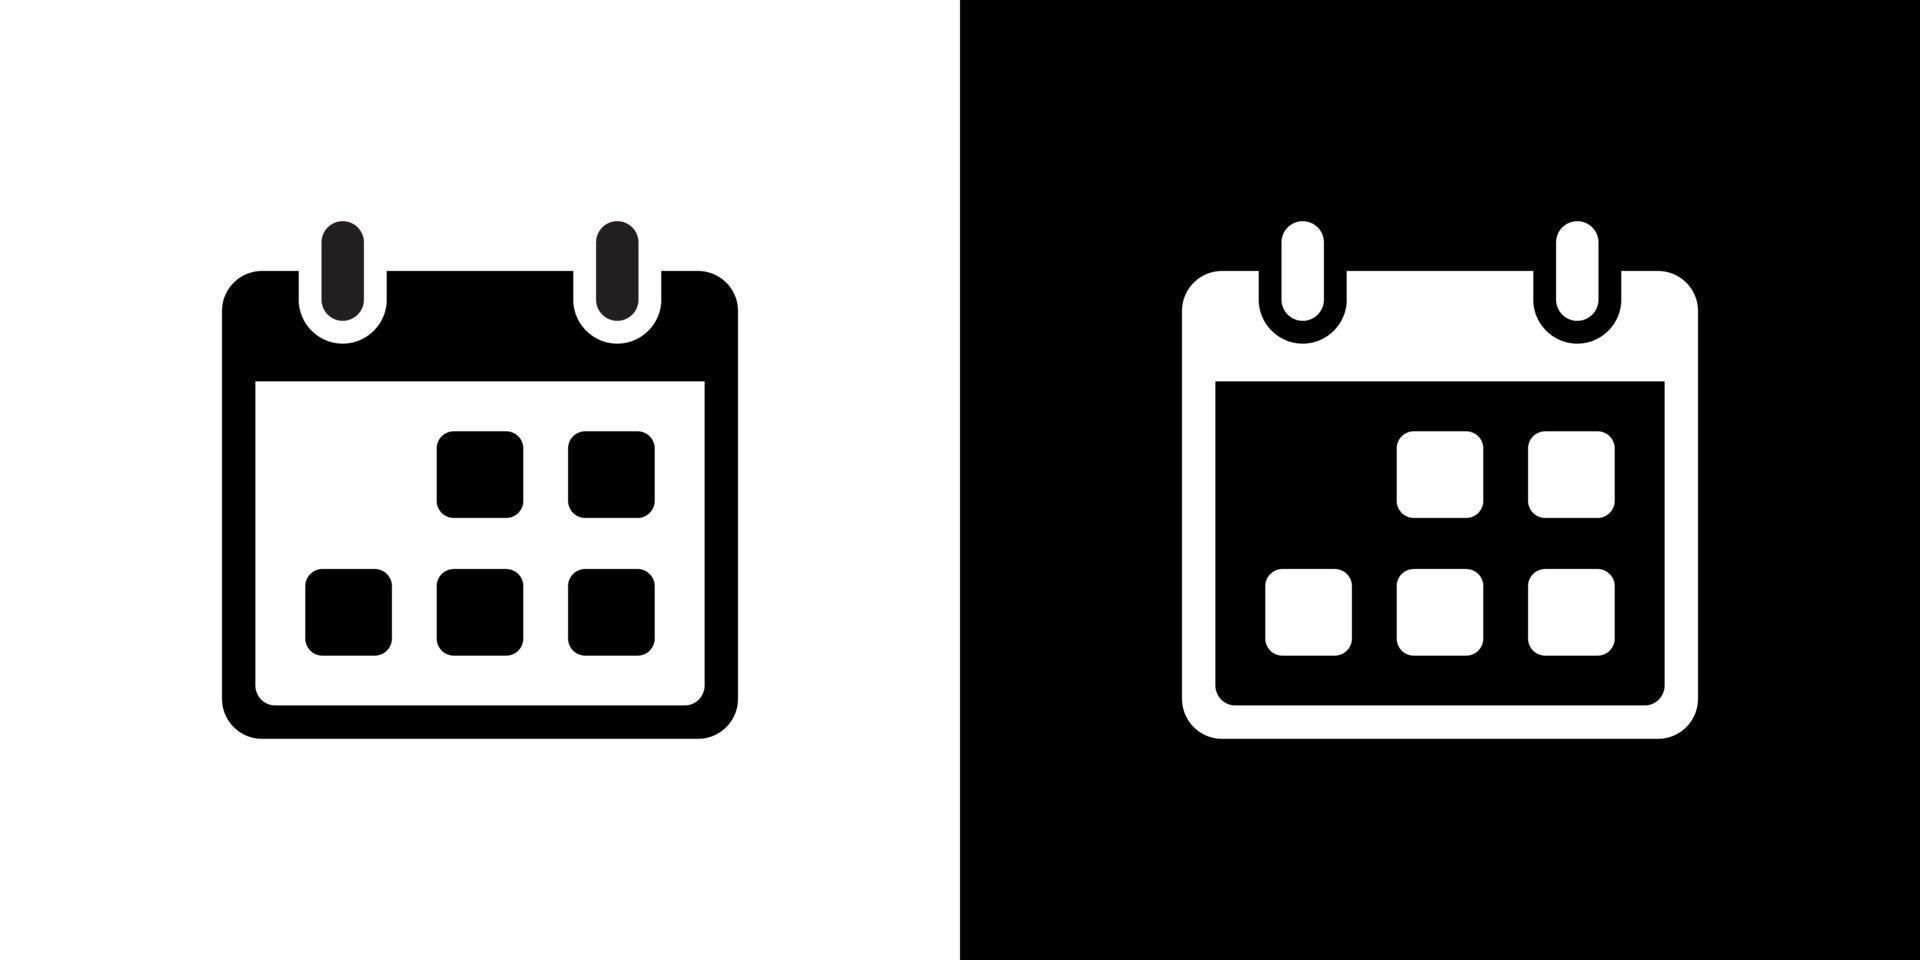 Calendar icon vector in clipart style. Schedule, date sign symbol